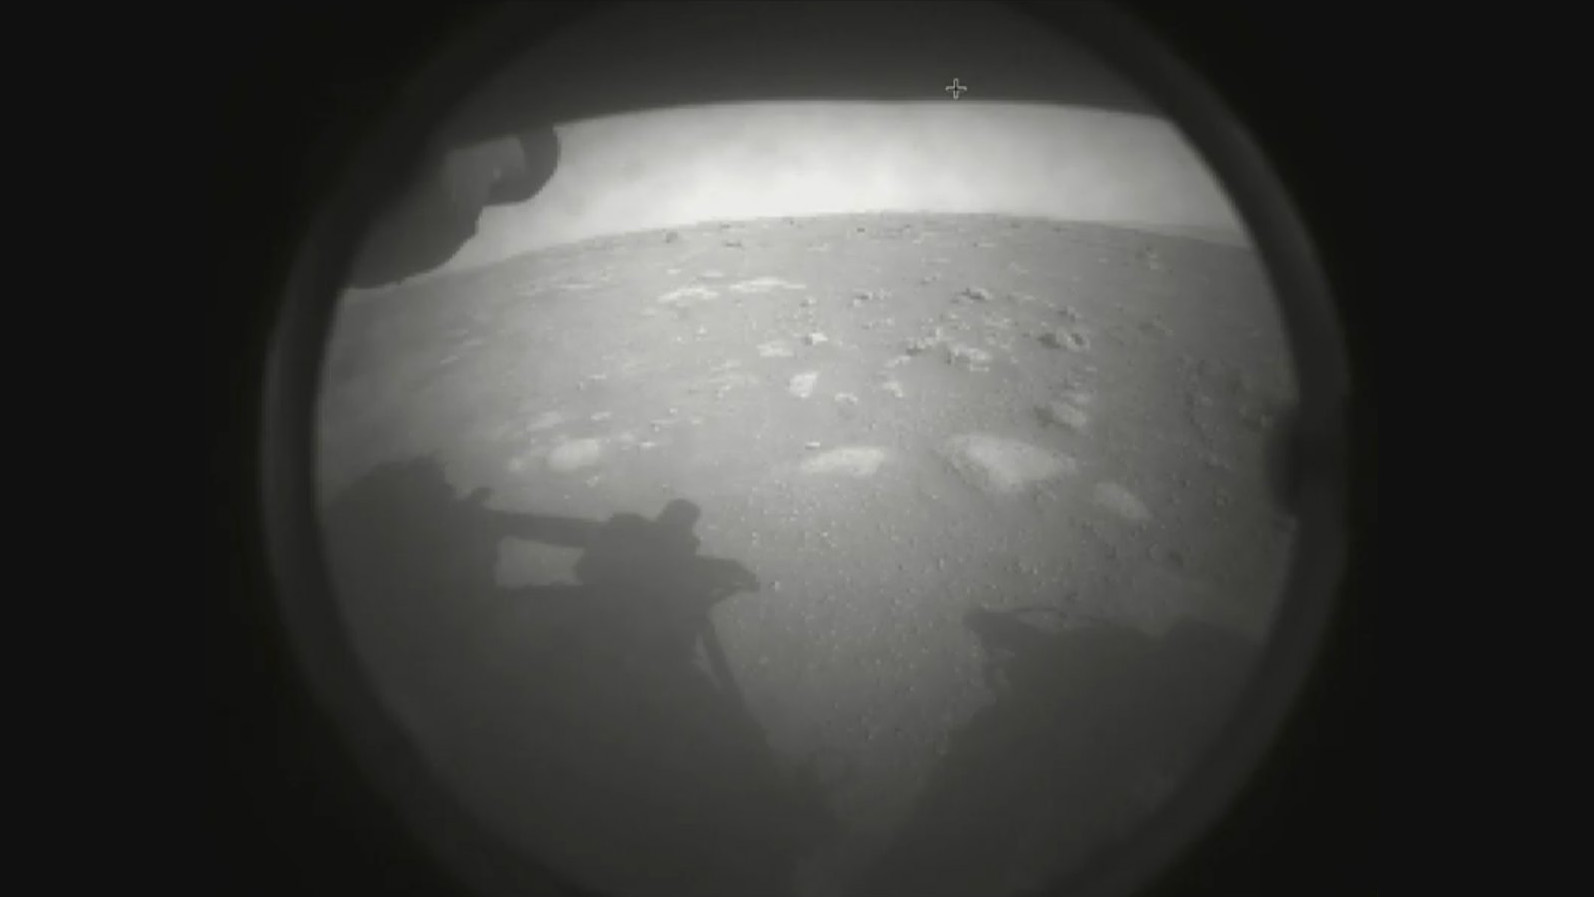 The peep from Mars: Here is the first inform from NASA’s Perseverance rover!